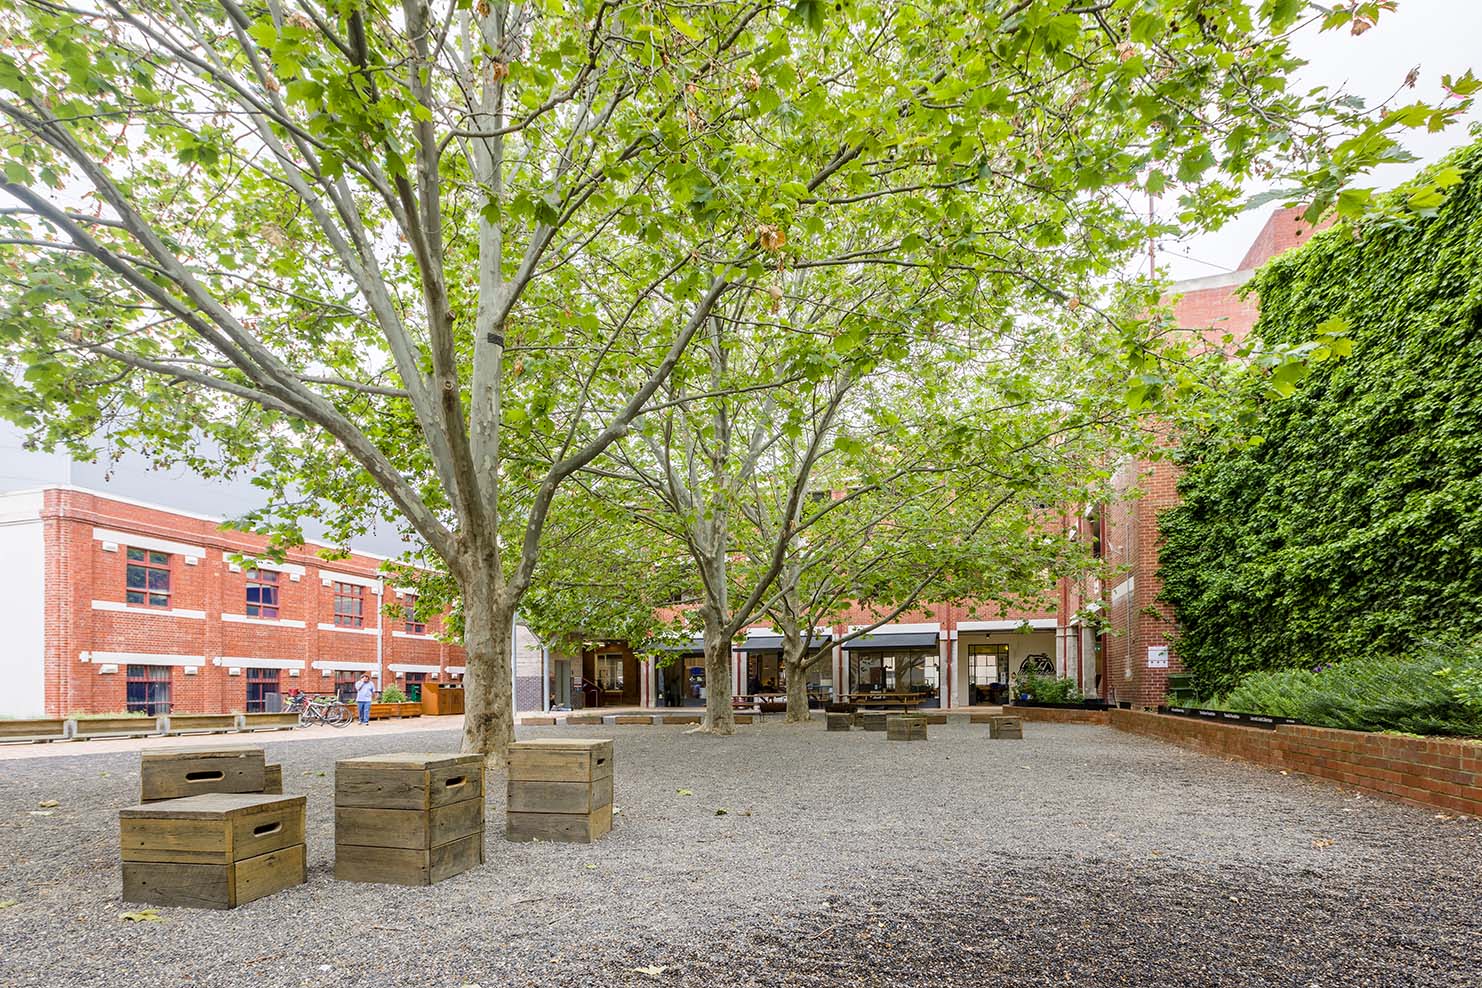 Photo of four wooden crate seats are scattered in the bottom left on grey gravel flooring. To the right is a large tree with green foliage, and in the background is a red brick building.